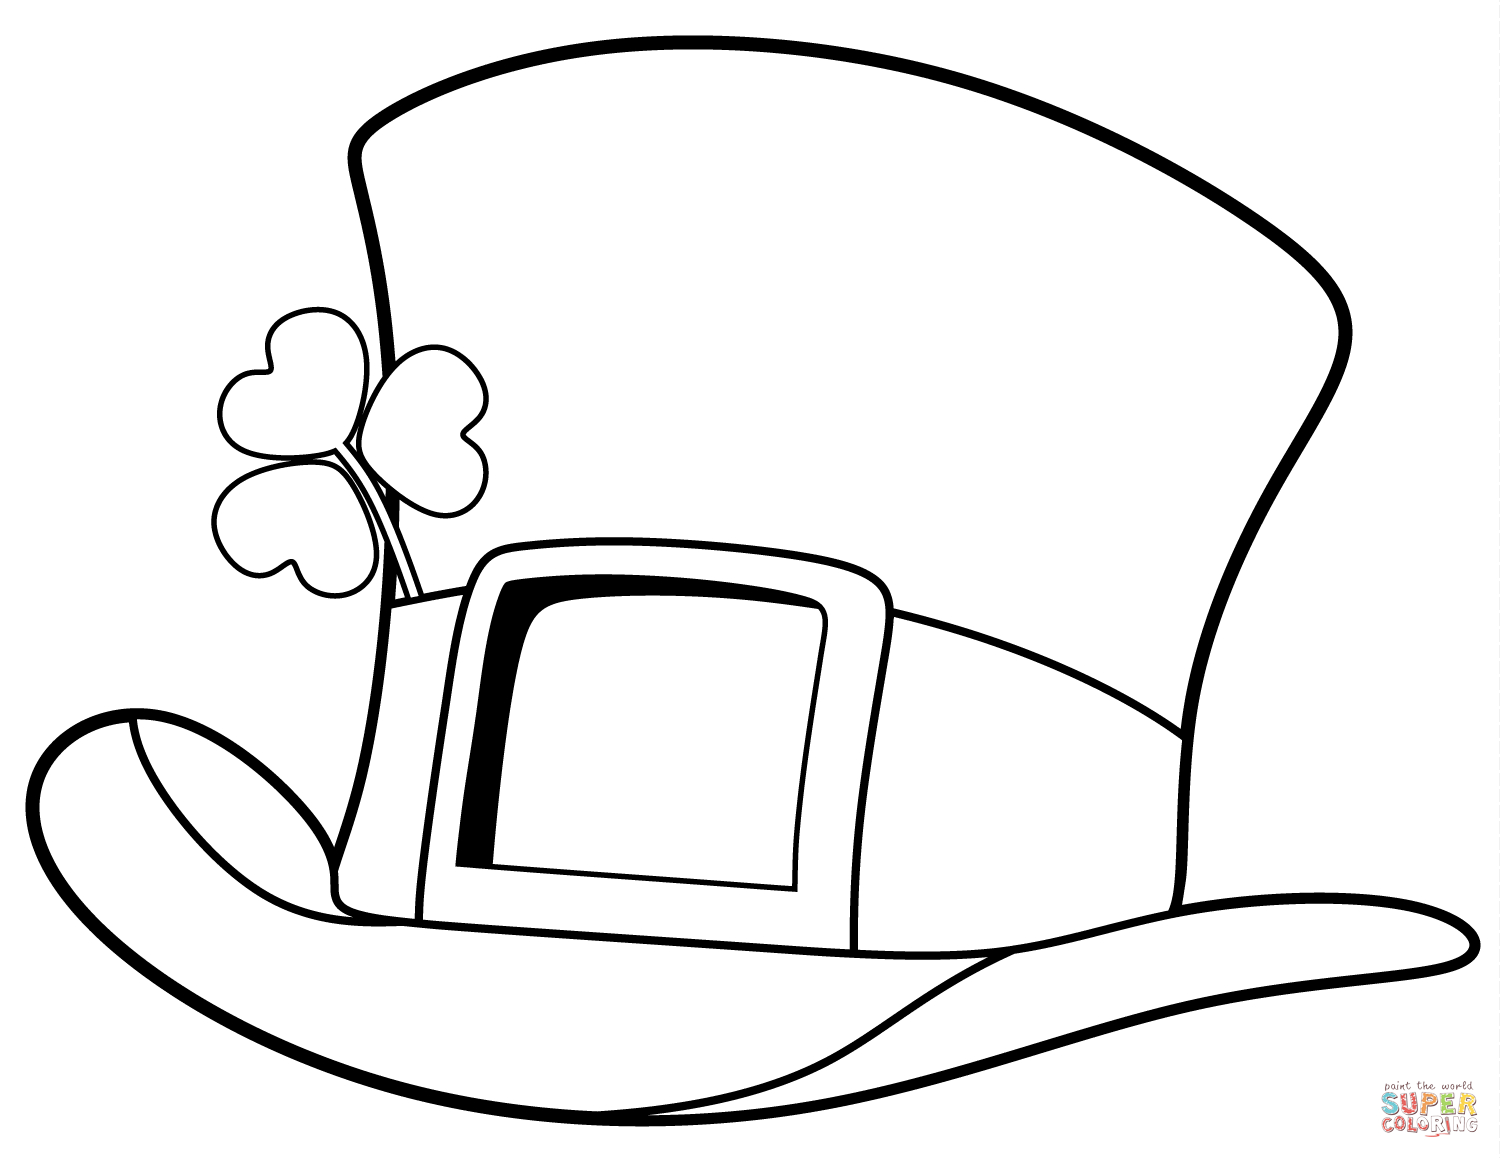 Hard Hat Coloring Page St Patrick Day Top Hat Coloring Page Free Printable Coloring Pages